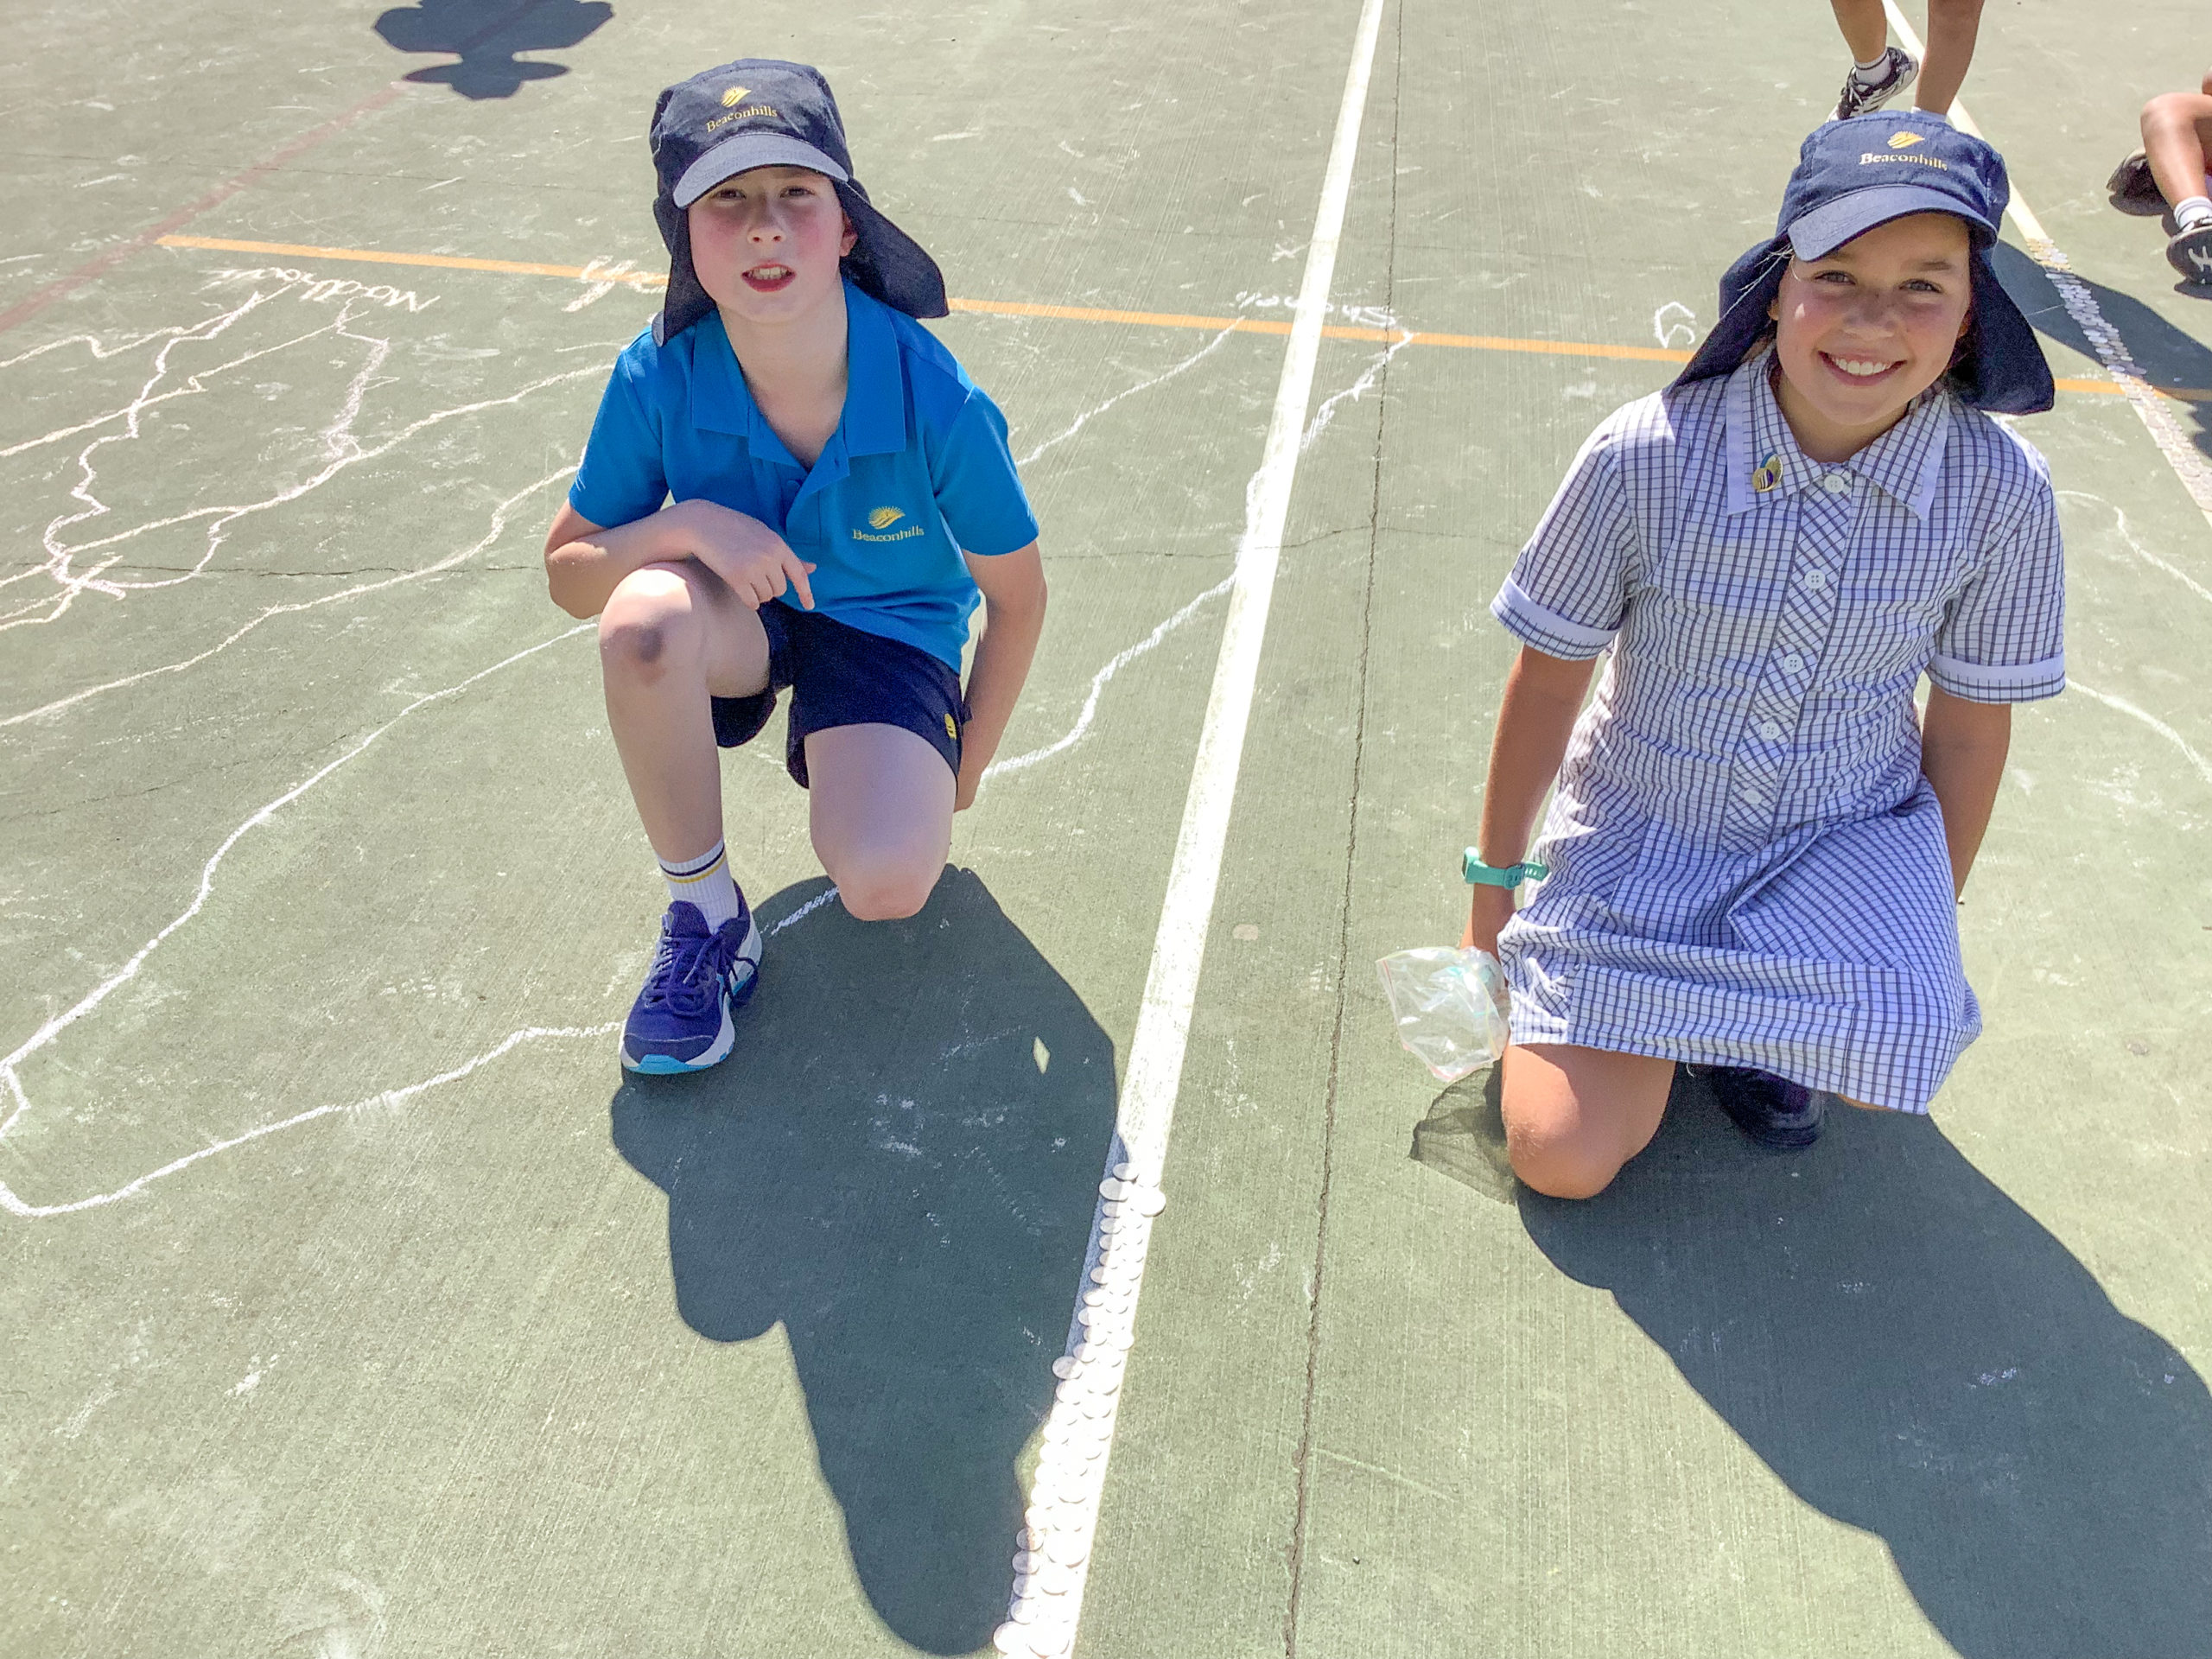 Two Beaconhills College students at the Junior School Coin Trail.